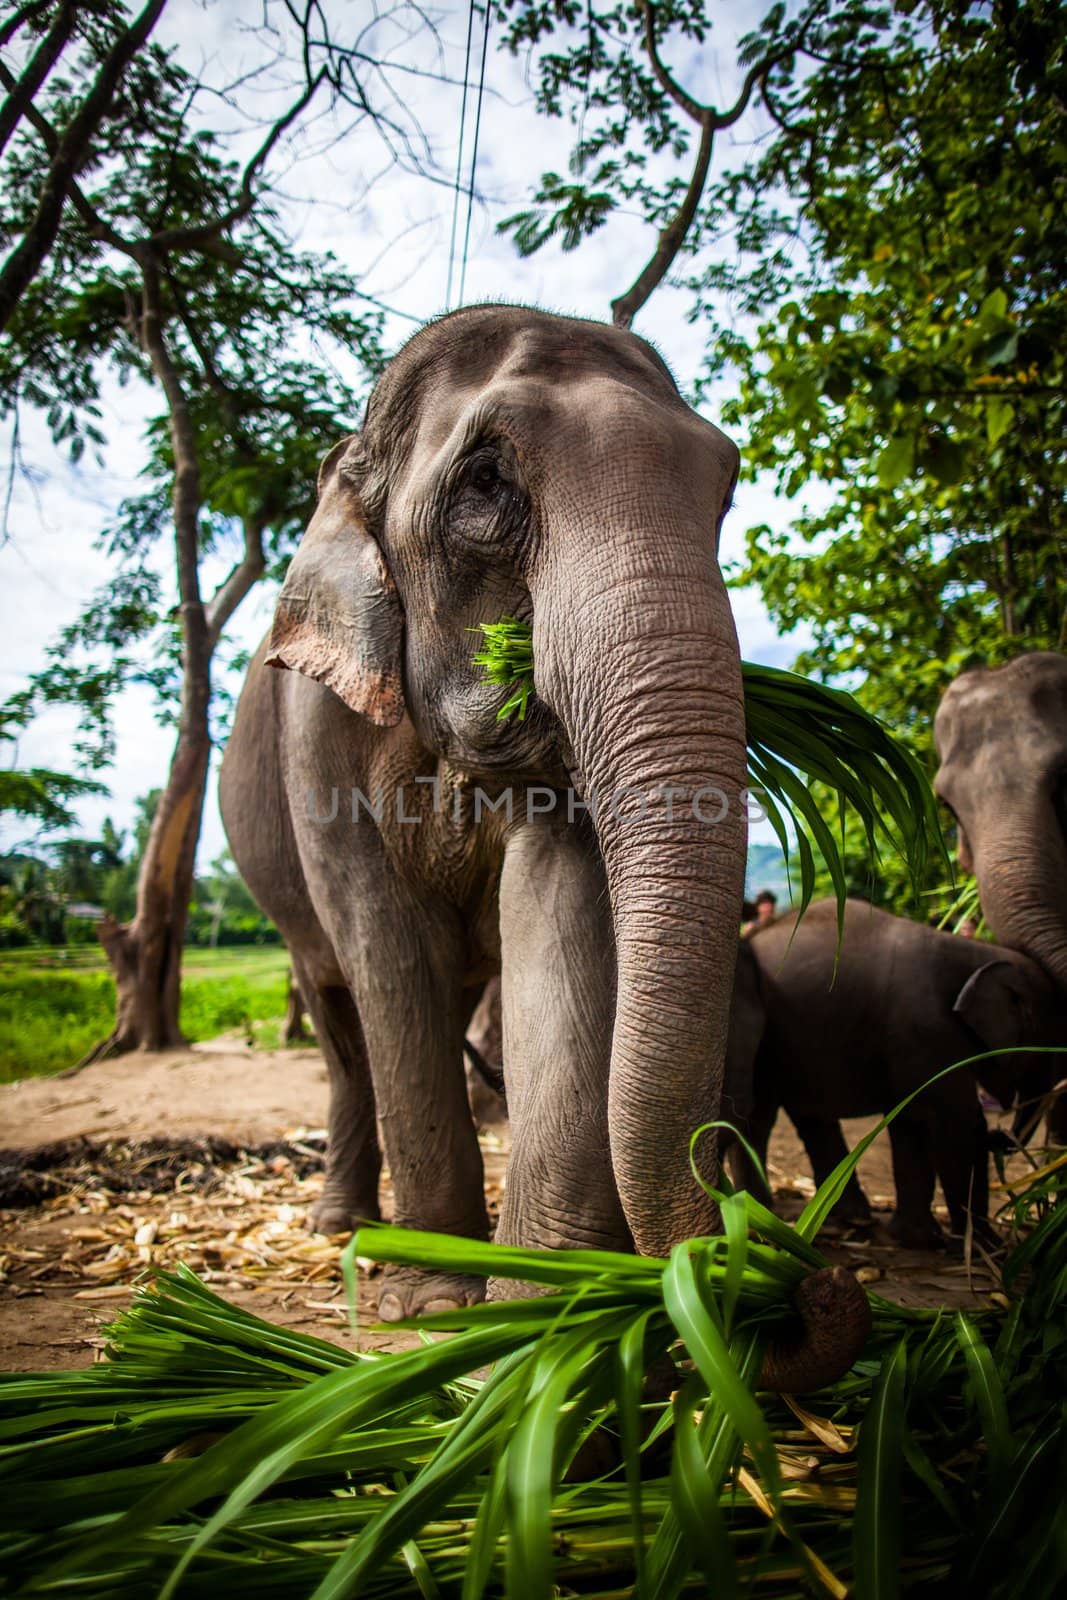 Mature female elephant with sugarcane in its mouth eating off the ground by hangingpixels